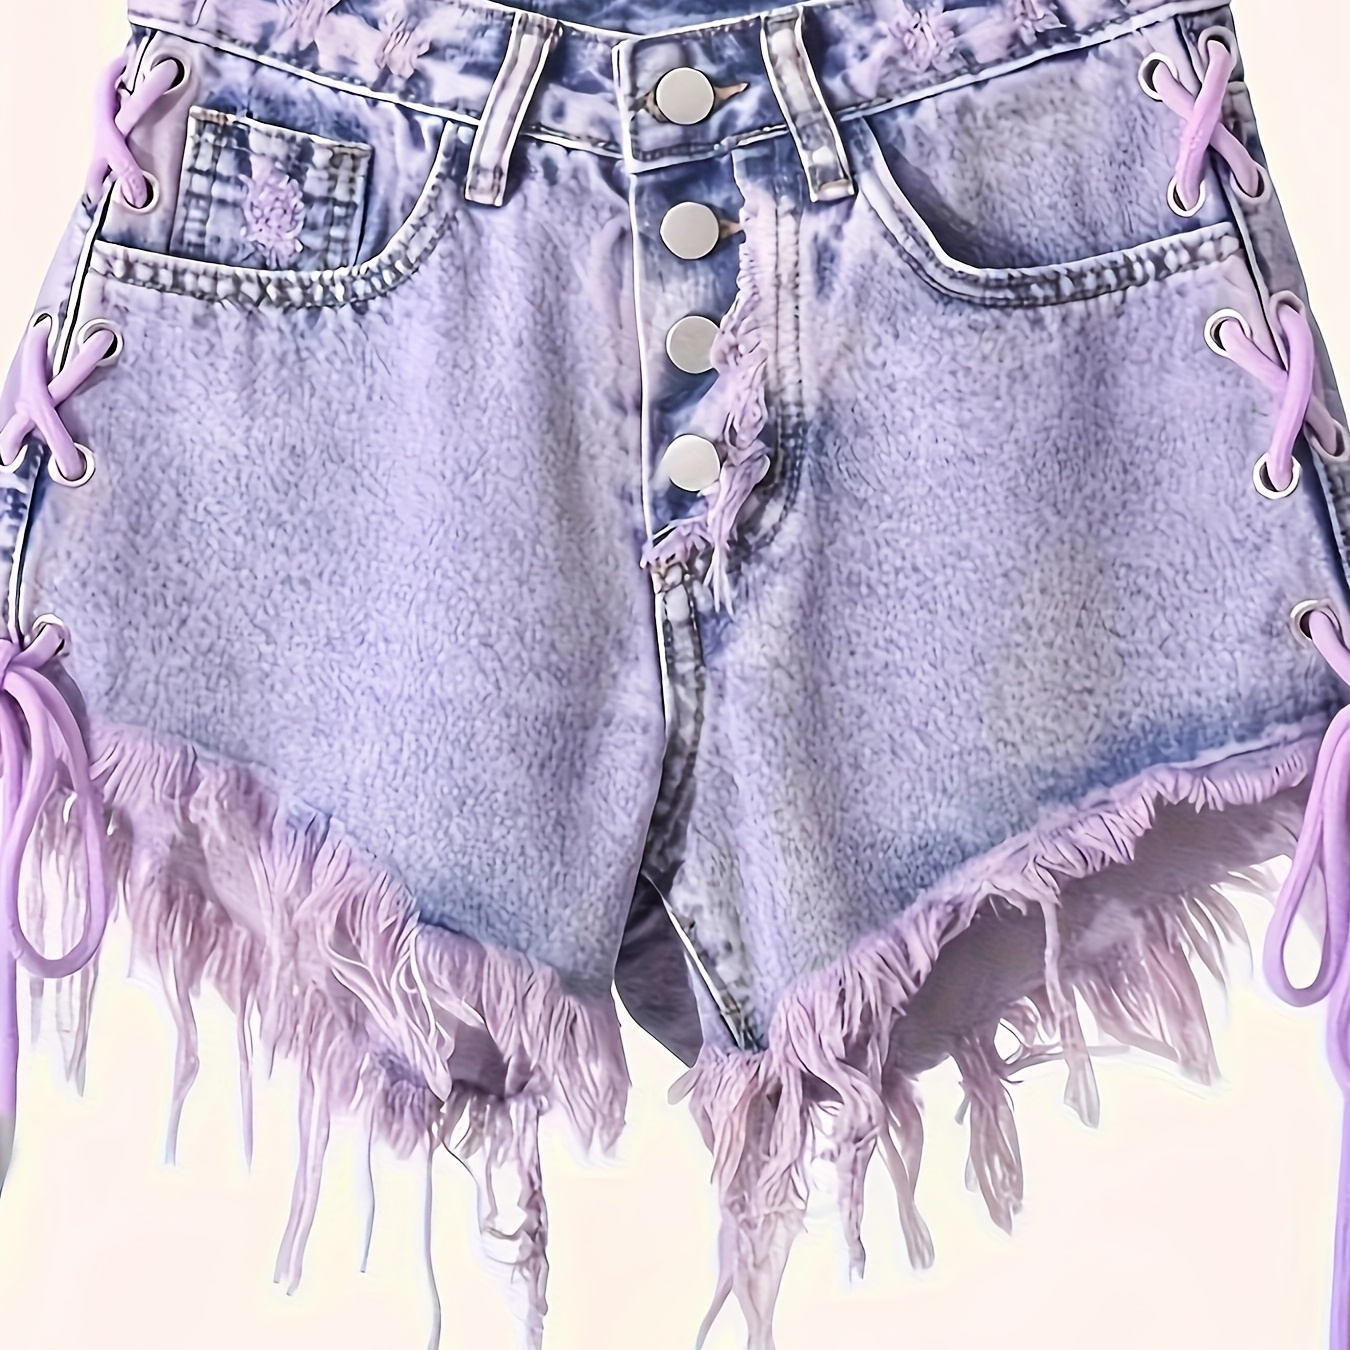 

Women's Fashion Distressed Denim Shorts, Sexy Frayed Hem Jean Hot Pants With Snowflake Washed Lace Up Side, Button-front Closure, Summer Streetwear